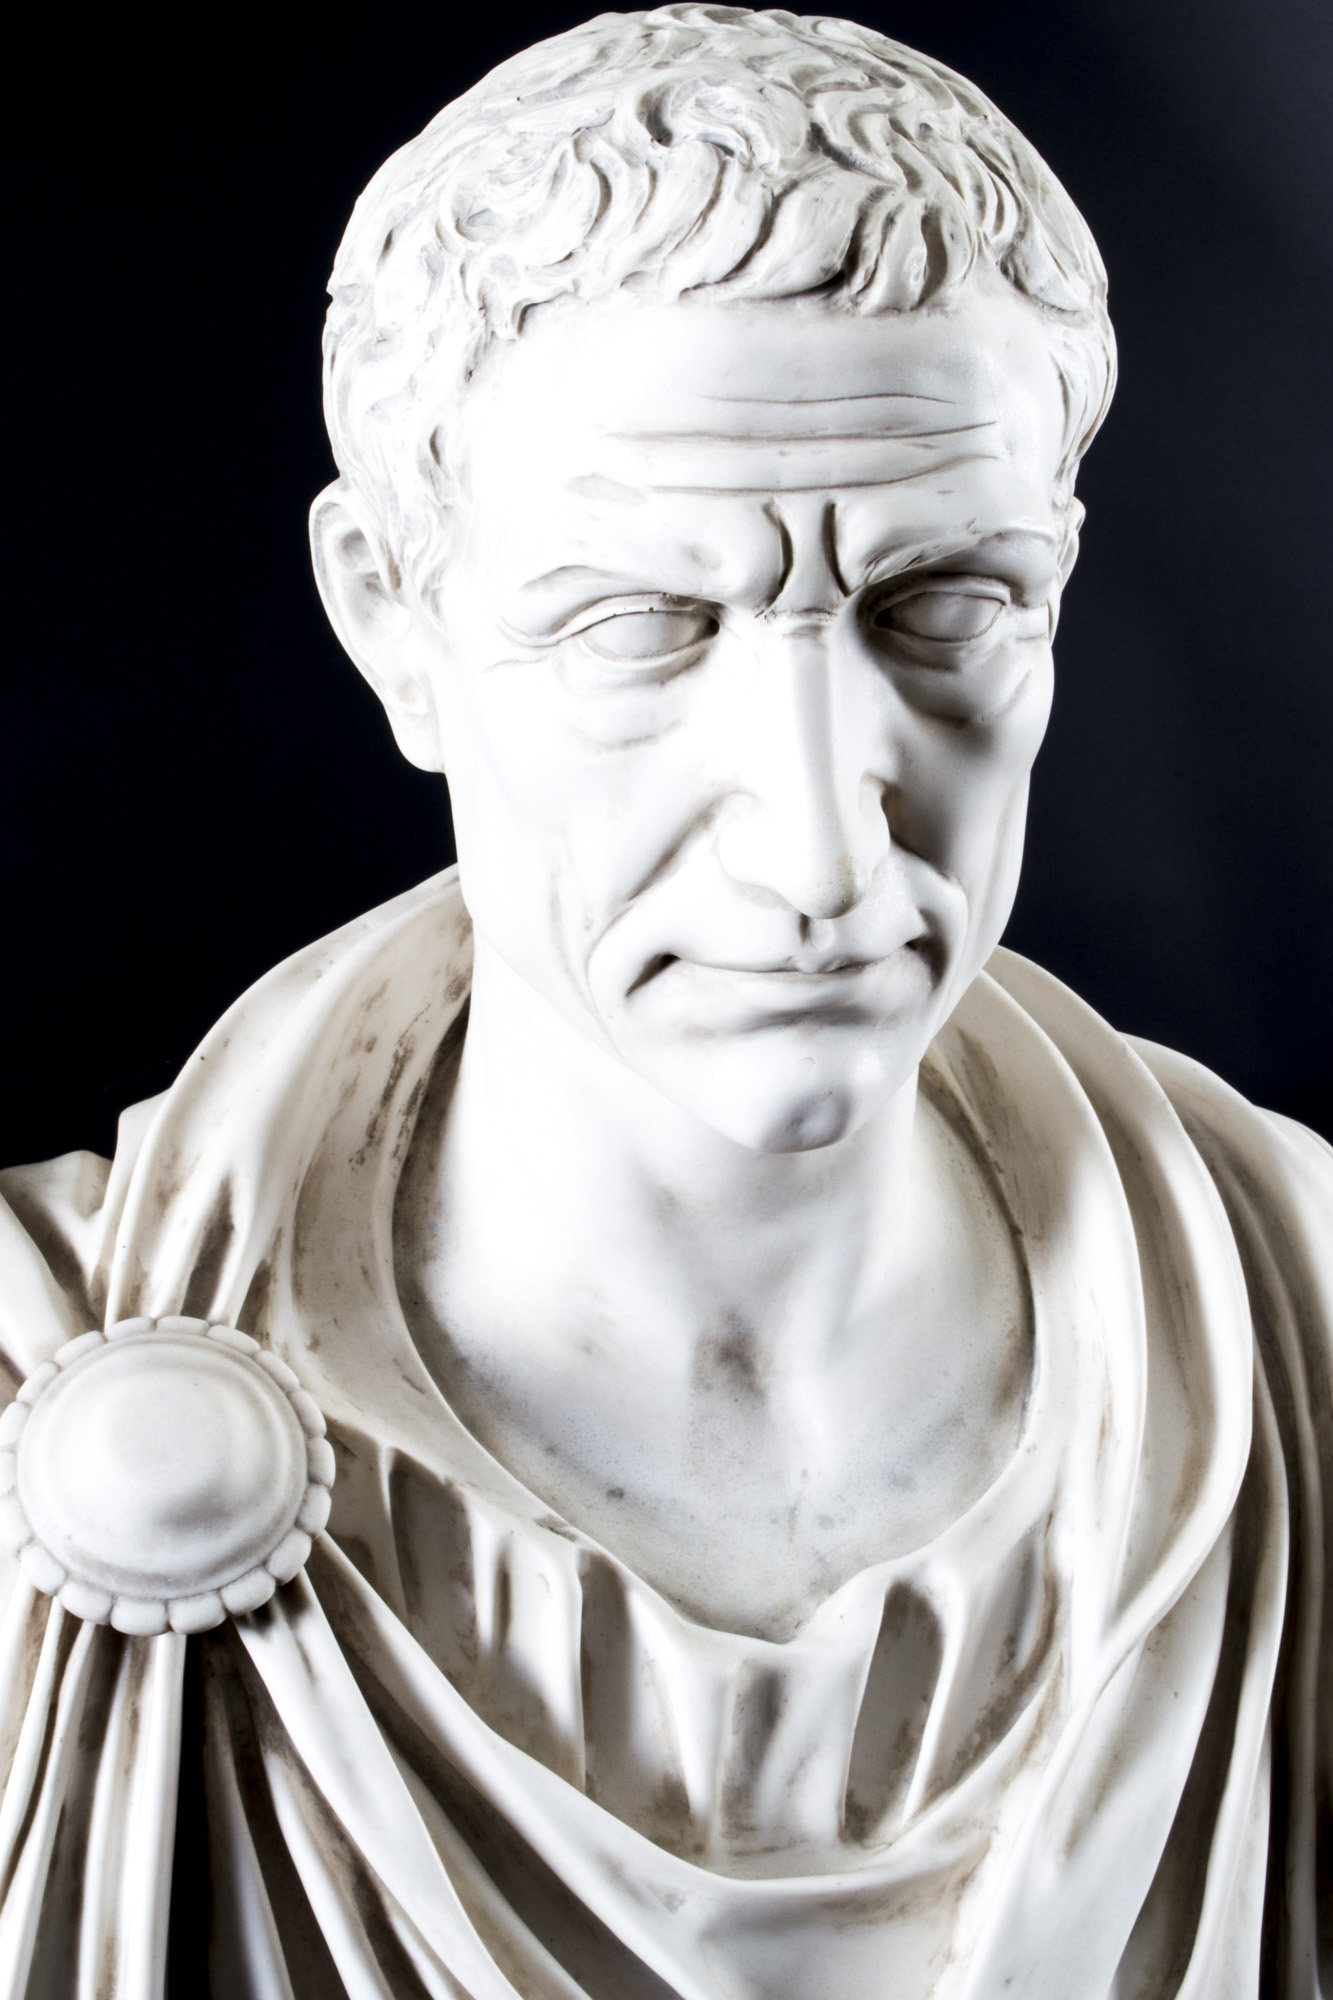 A beautifully sculpted marble bust of the Roman politician Marcus Brutus. - 02947-Stunning-Marble-Bust-Marcus-Junius-Brutus-2